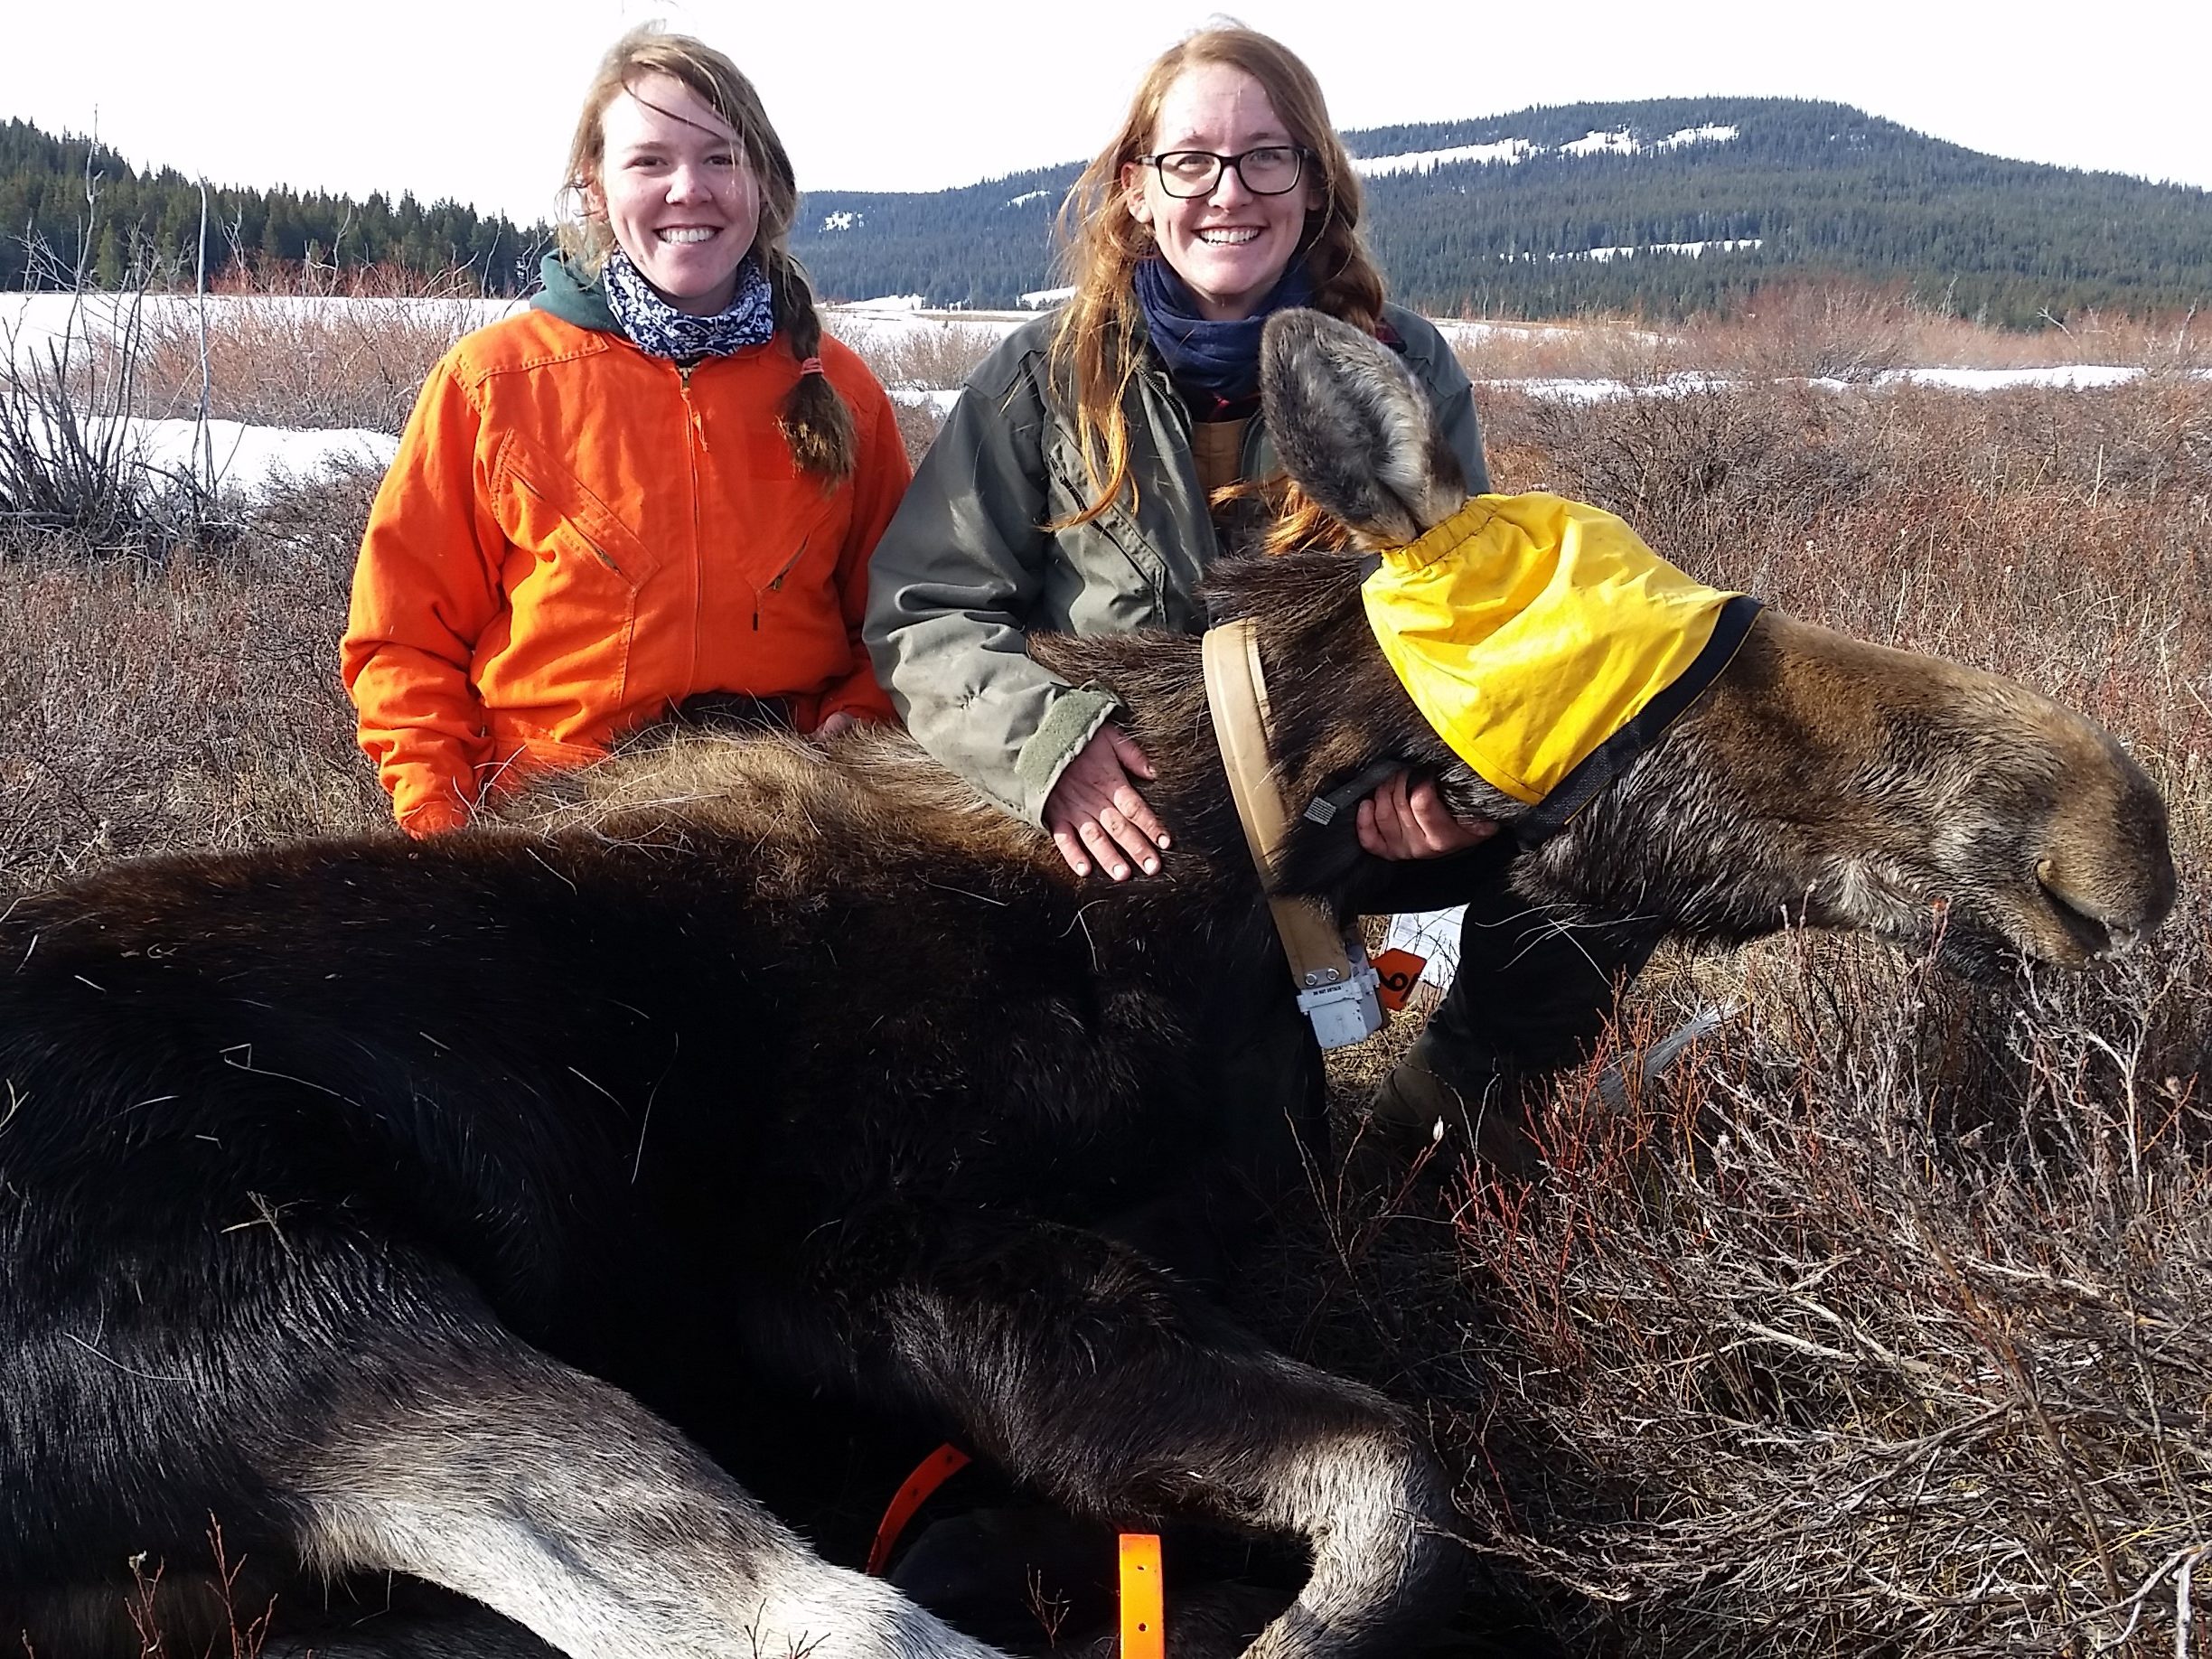 Tayler LaSharr and Katey Huggler with a collared female moose in the Bighorns, WY.